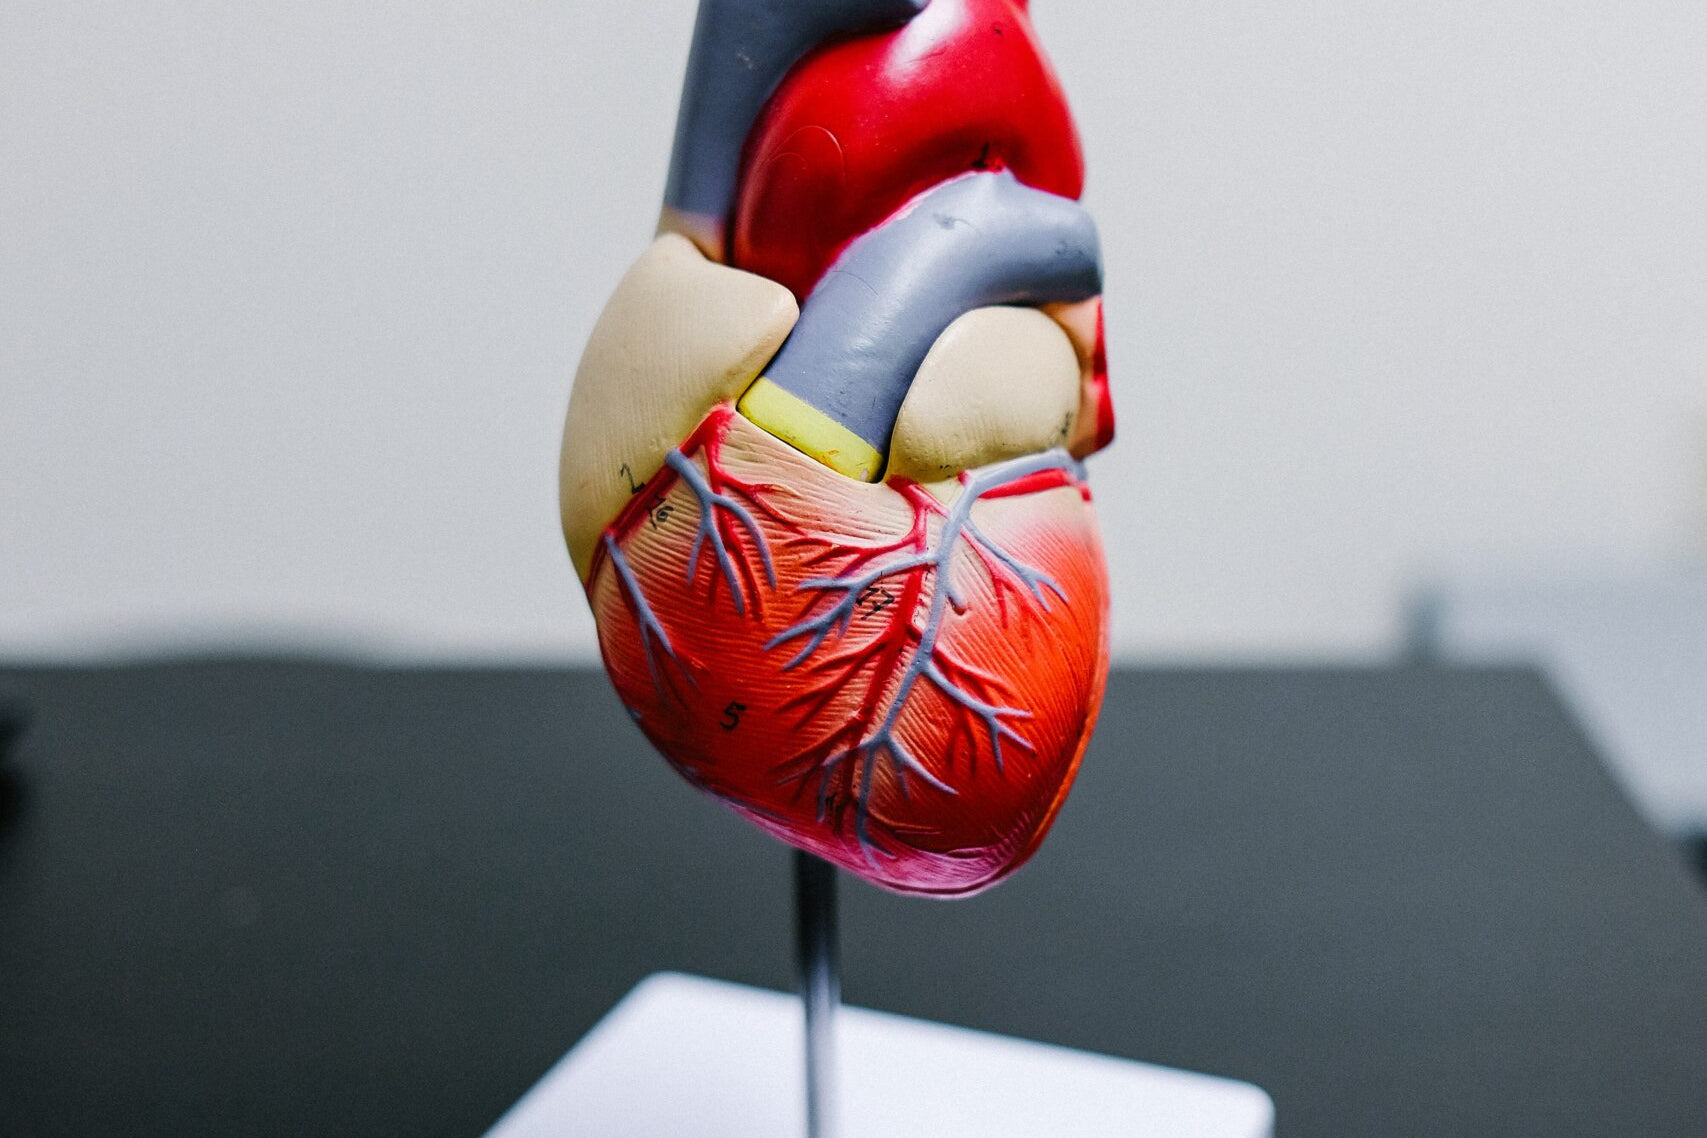 An anatomical view of the human heart